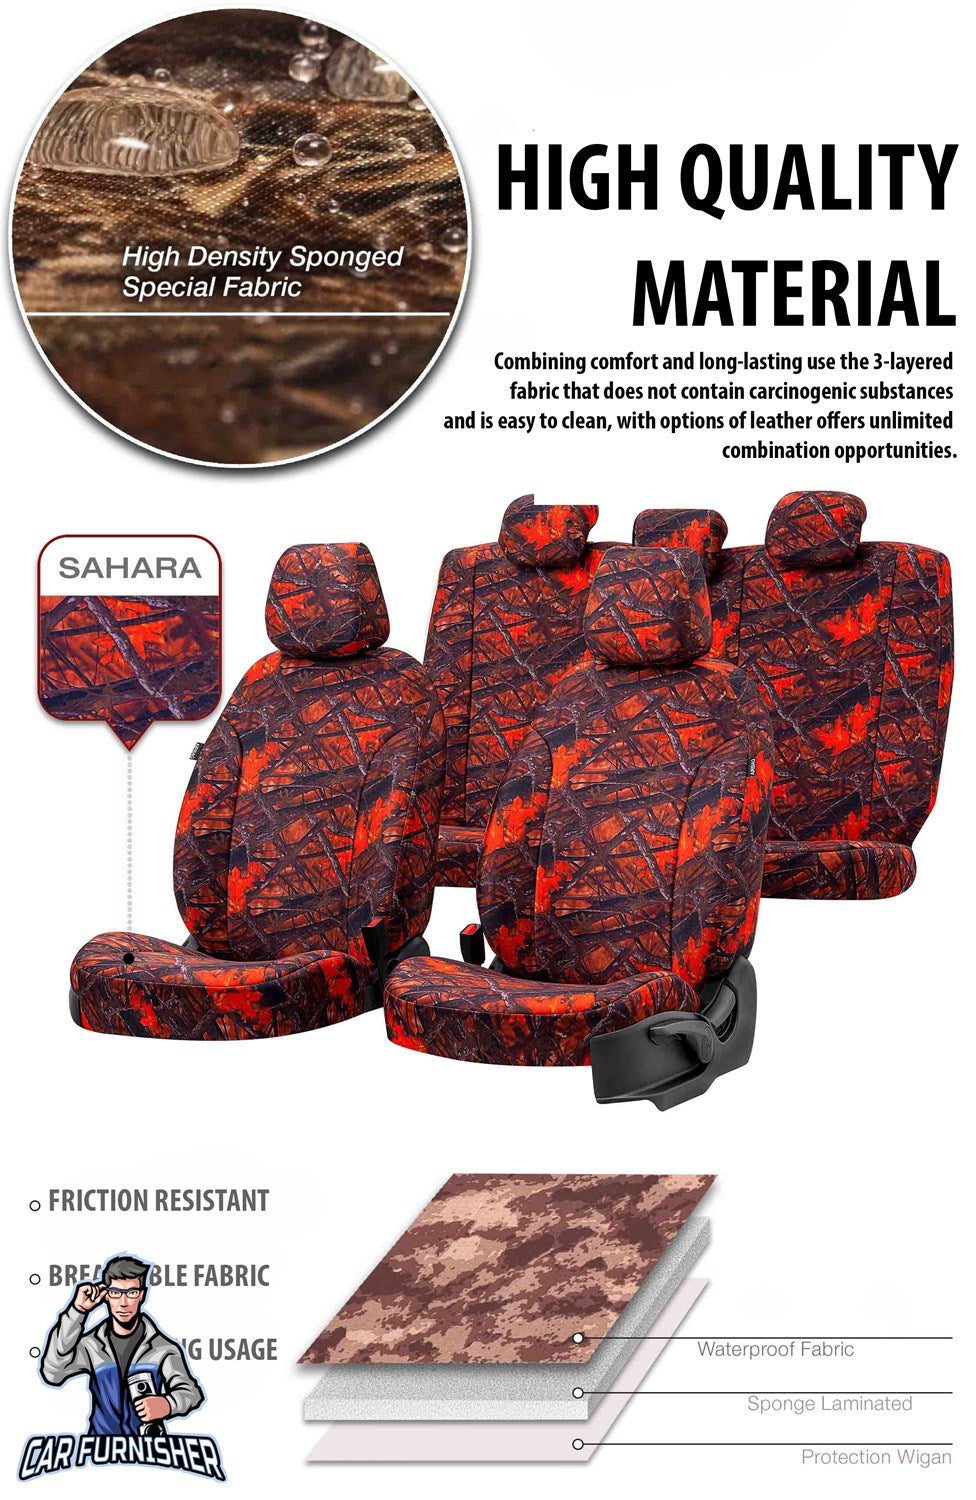 Hyundai Accent Seat Covers Camouflage Waterproof Design Montblanc Camo Waterproof Fabric